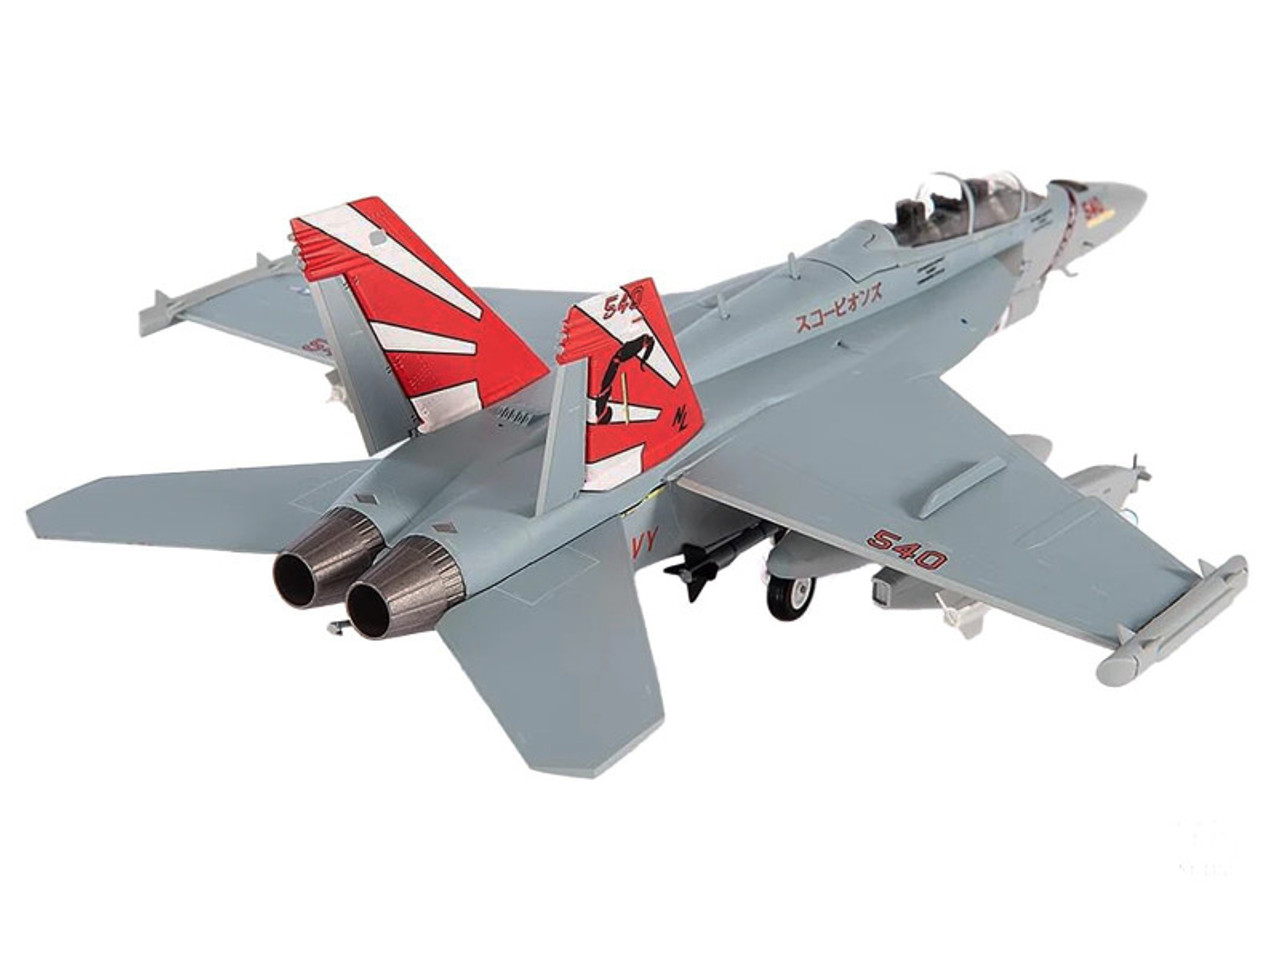 Boeing EA-18G Growler Aircraft "VAQ-132 Scorpions" United States Navy 1/72 Diecast Model by JC Wings